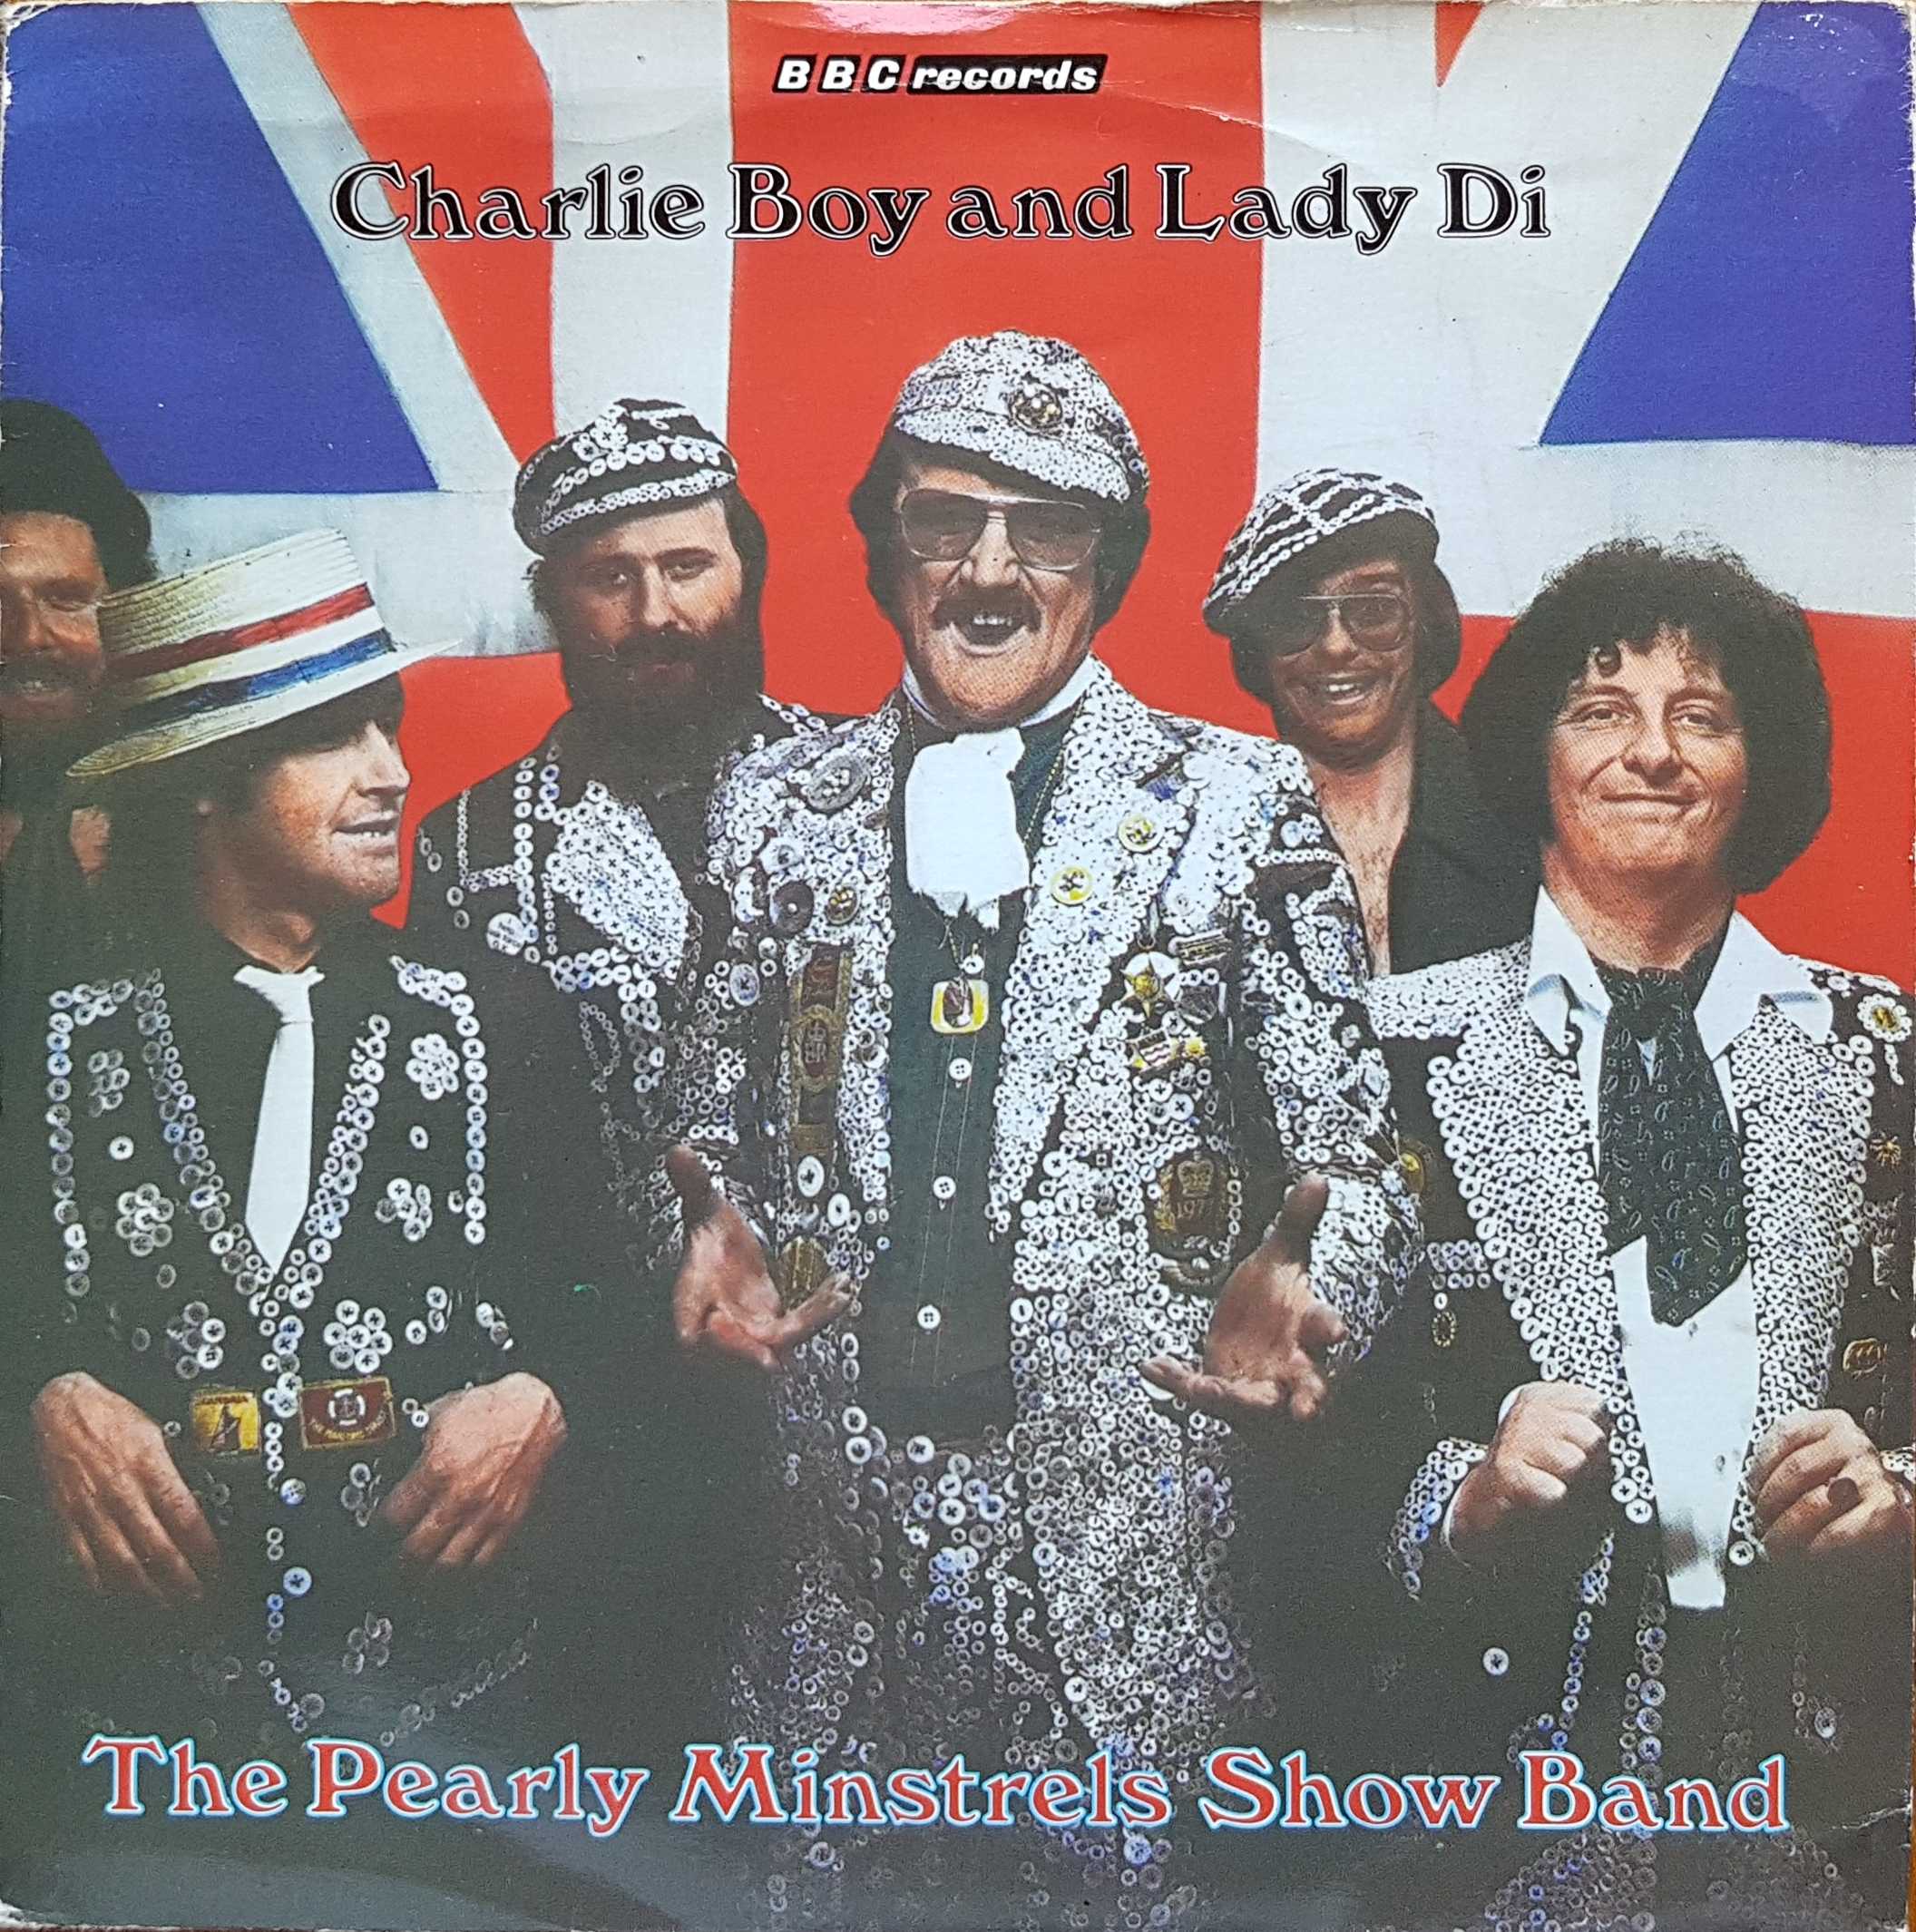 Picture of RESL 94 Charlie Boy and Lady Di by artist Ricky Conway from the BBC records and Tapes library